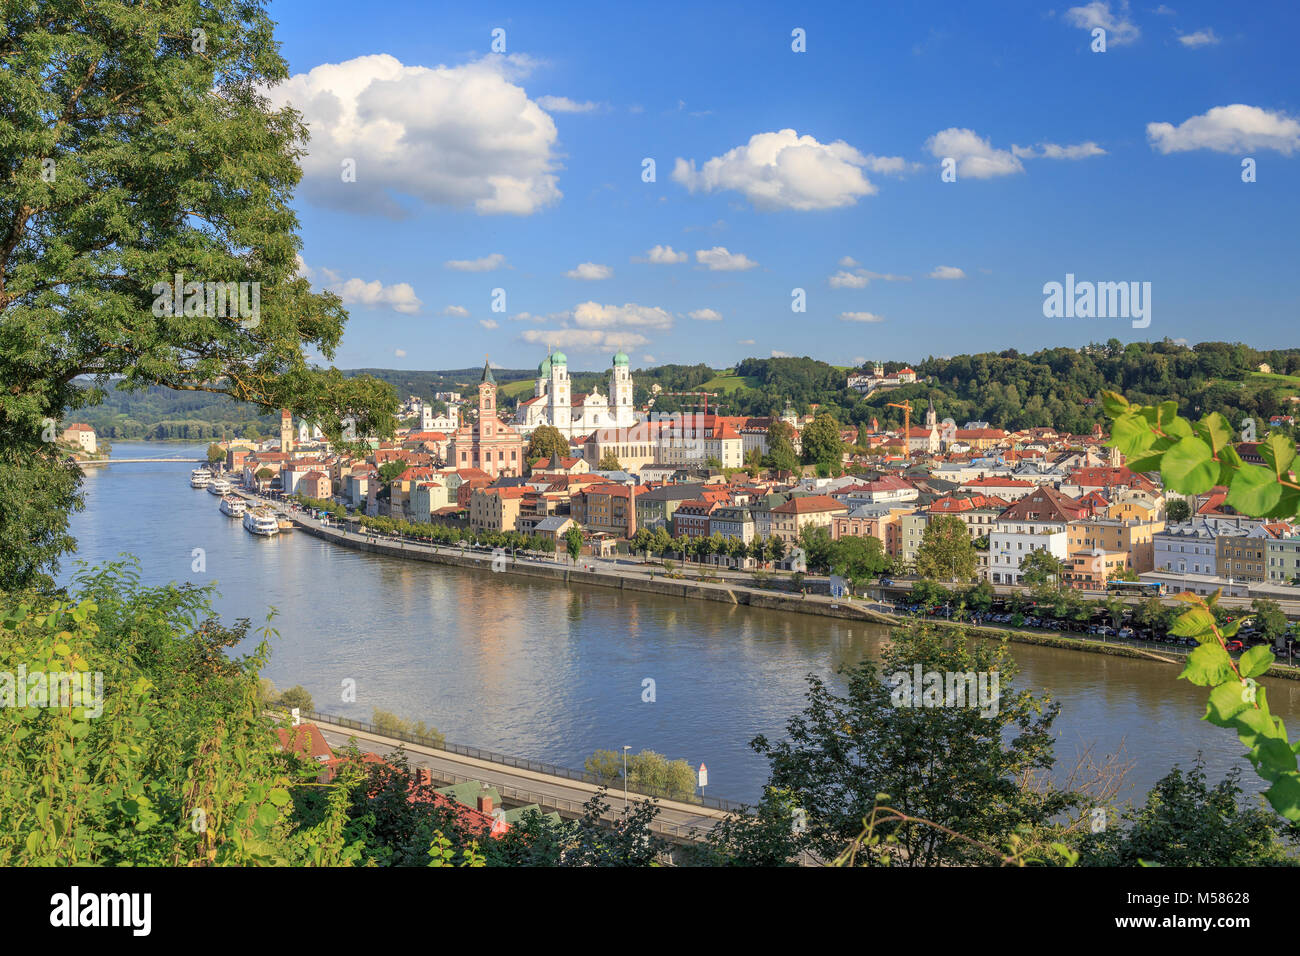 Passau at the Danube river in Summer Stock Photo